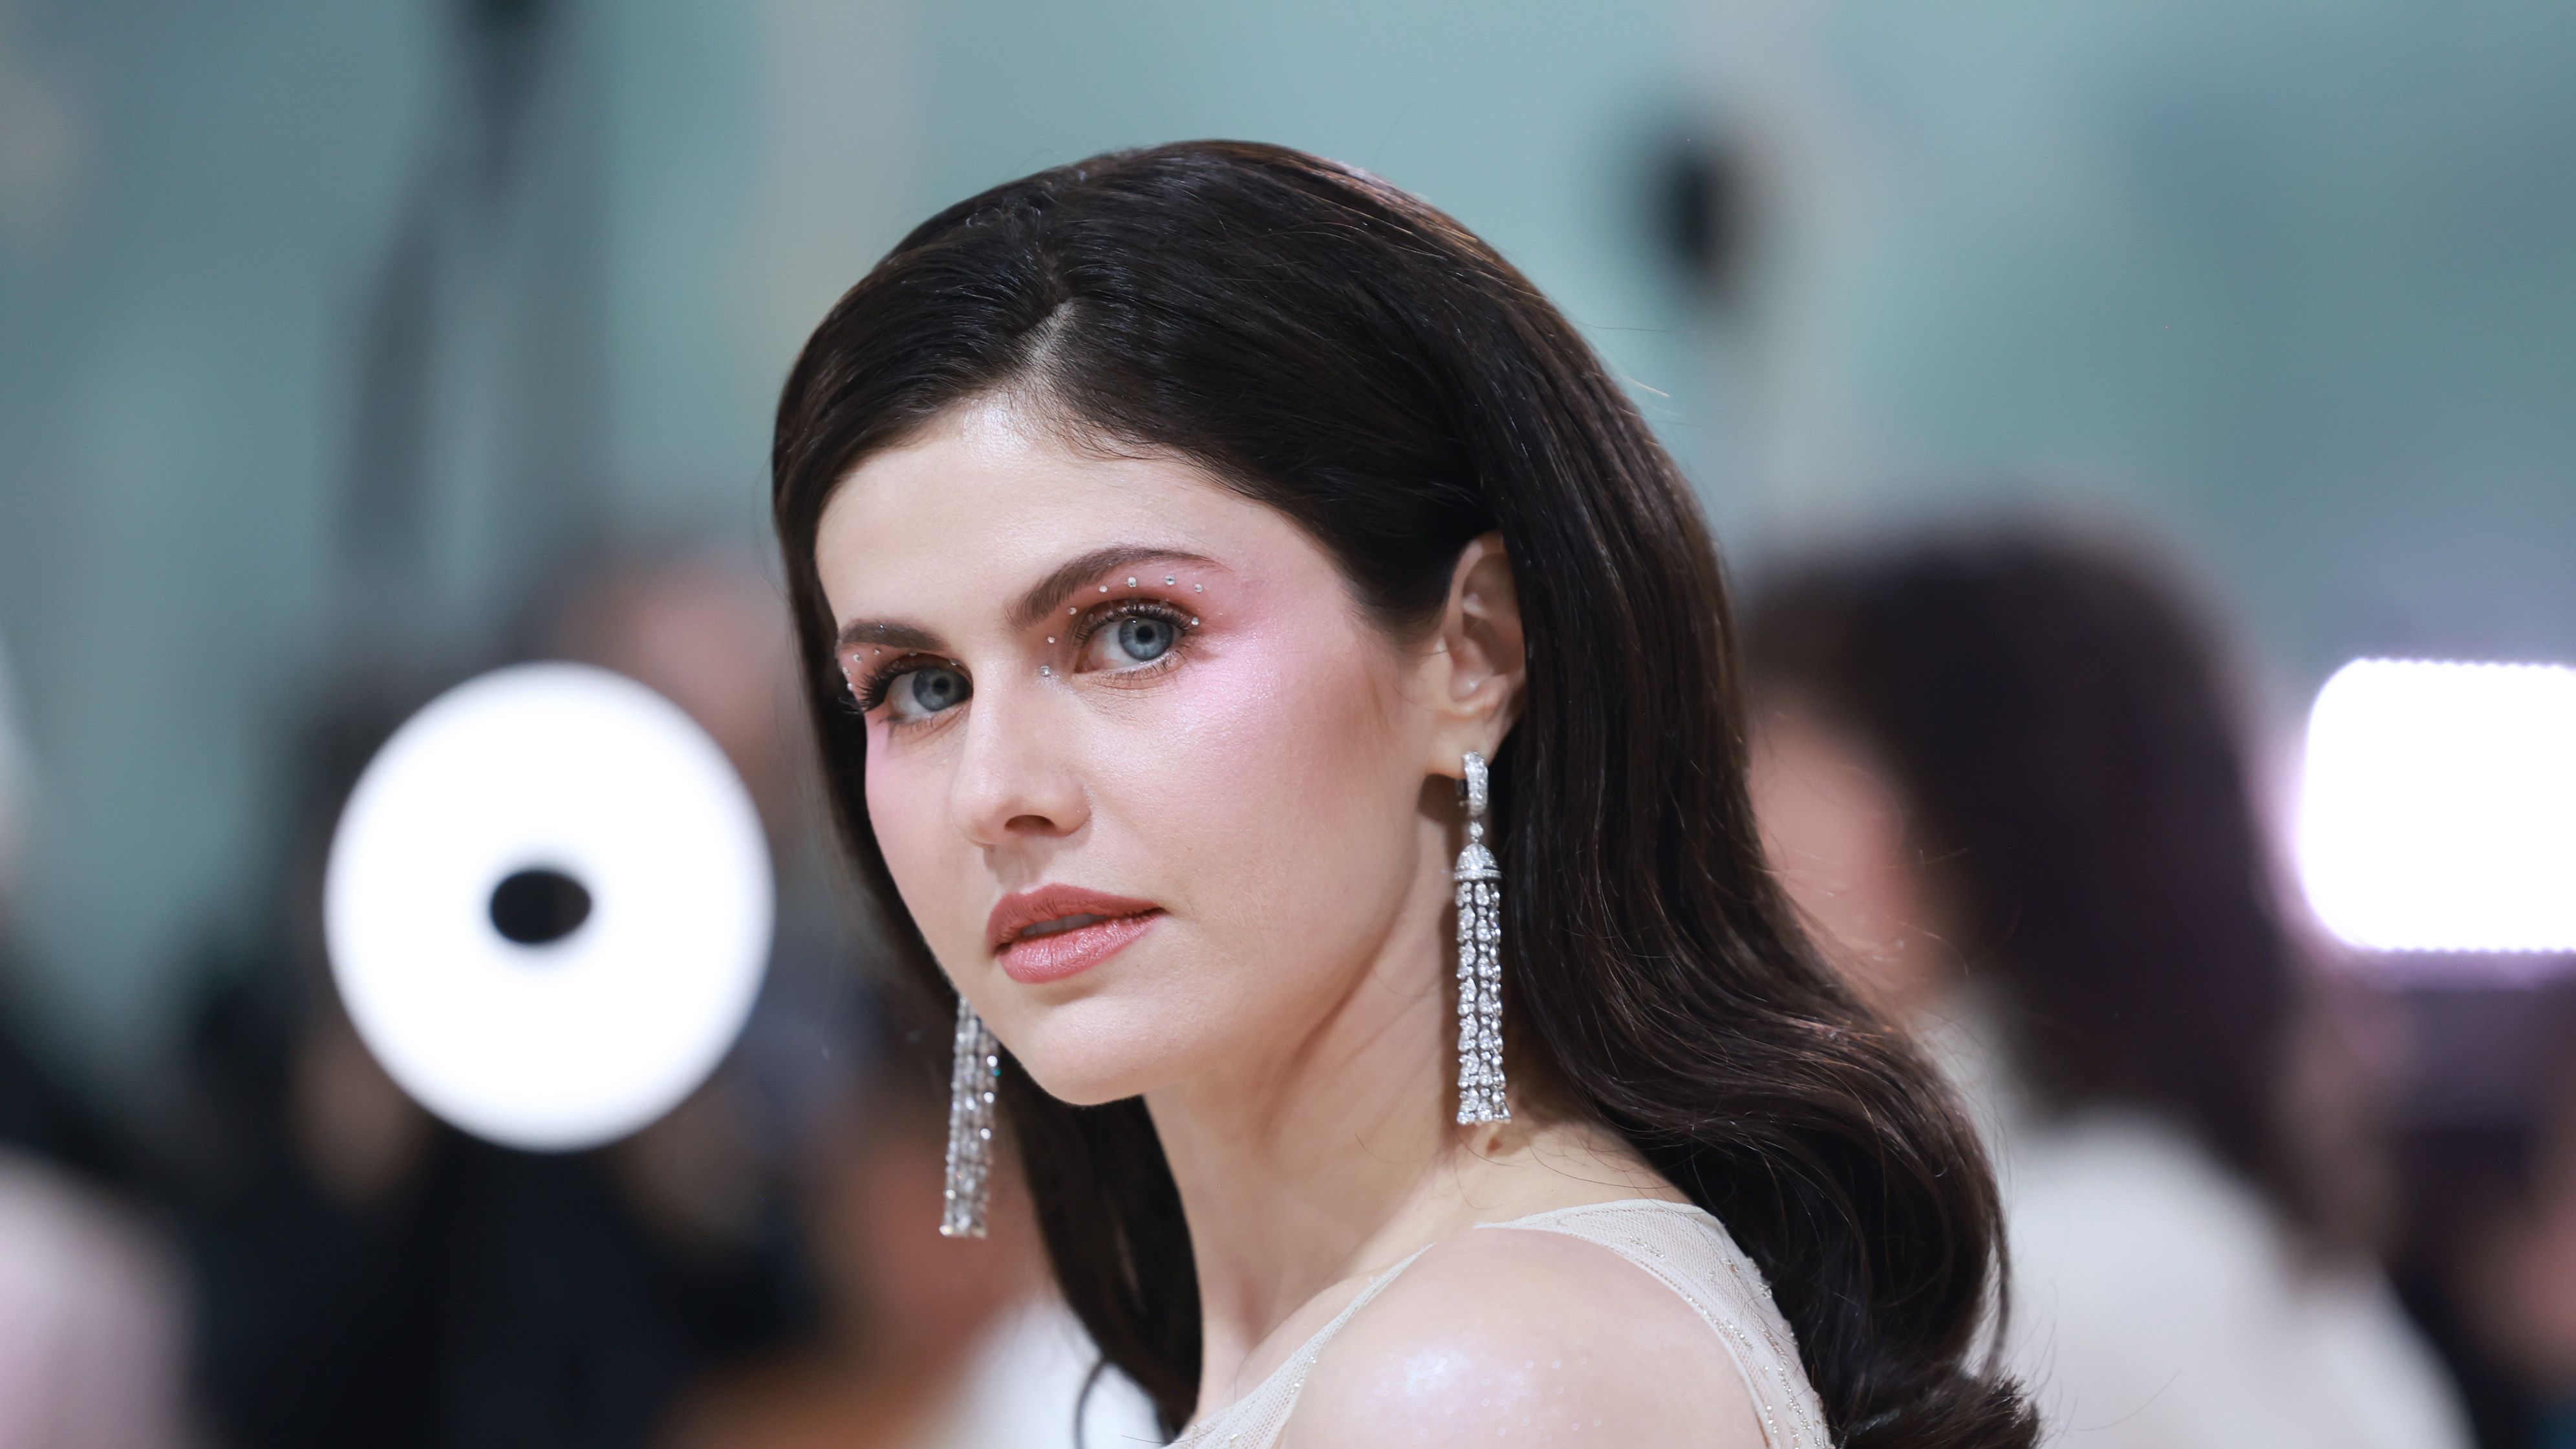 Hot Sex Videos Shortcut S Videos - Alexandra Daddario Posed In The Nude On IG, And Fans Went Bonkers